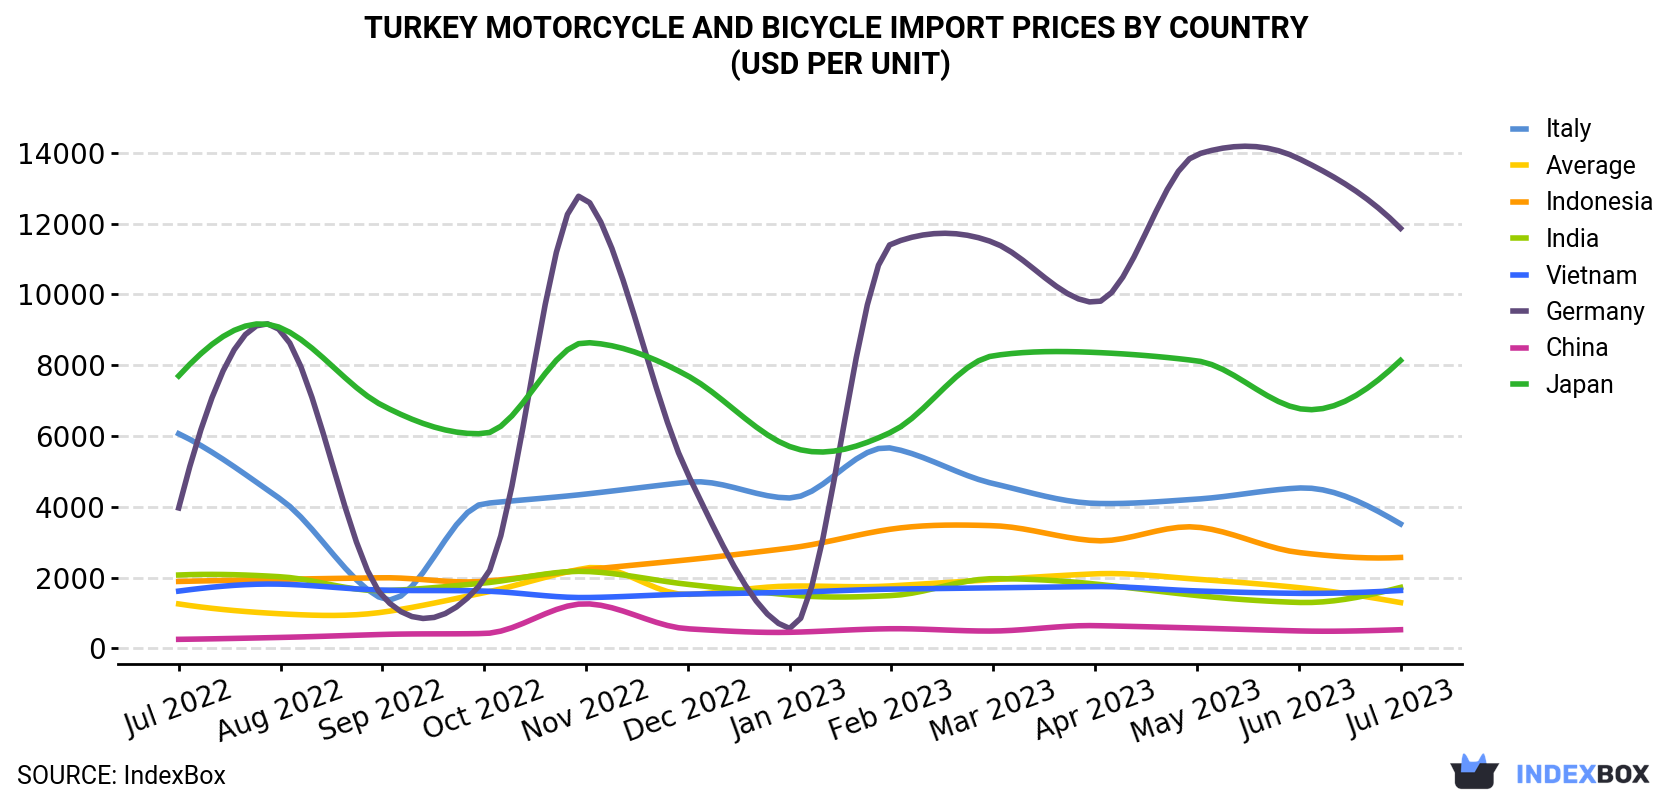 Turkey Motorcycle And Bicycle Import Prices By Country (USD Per Unit)